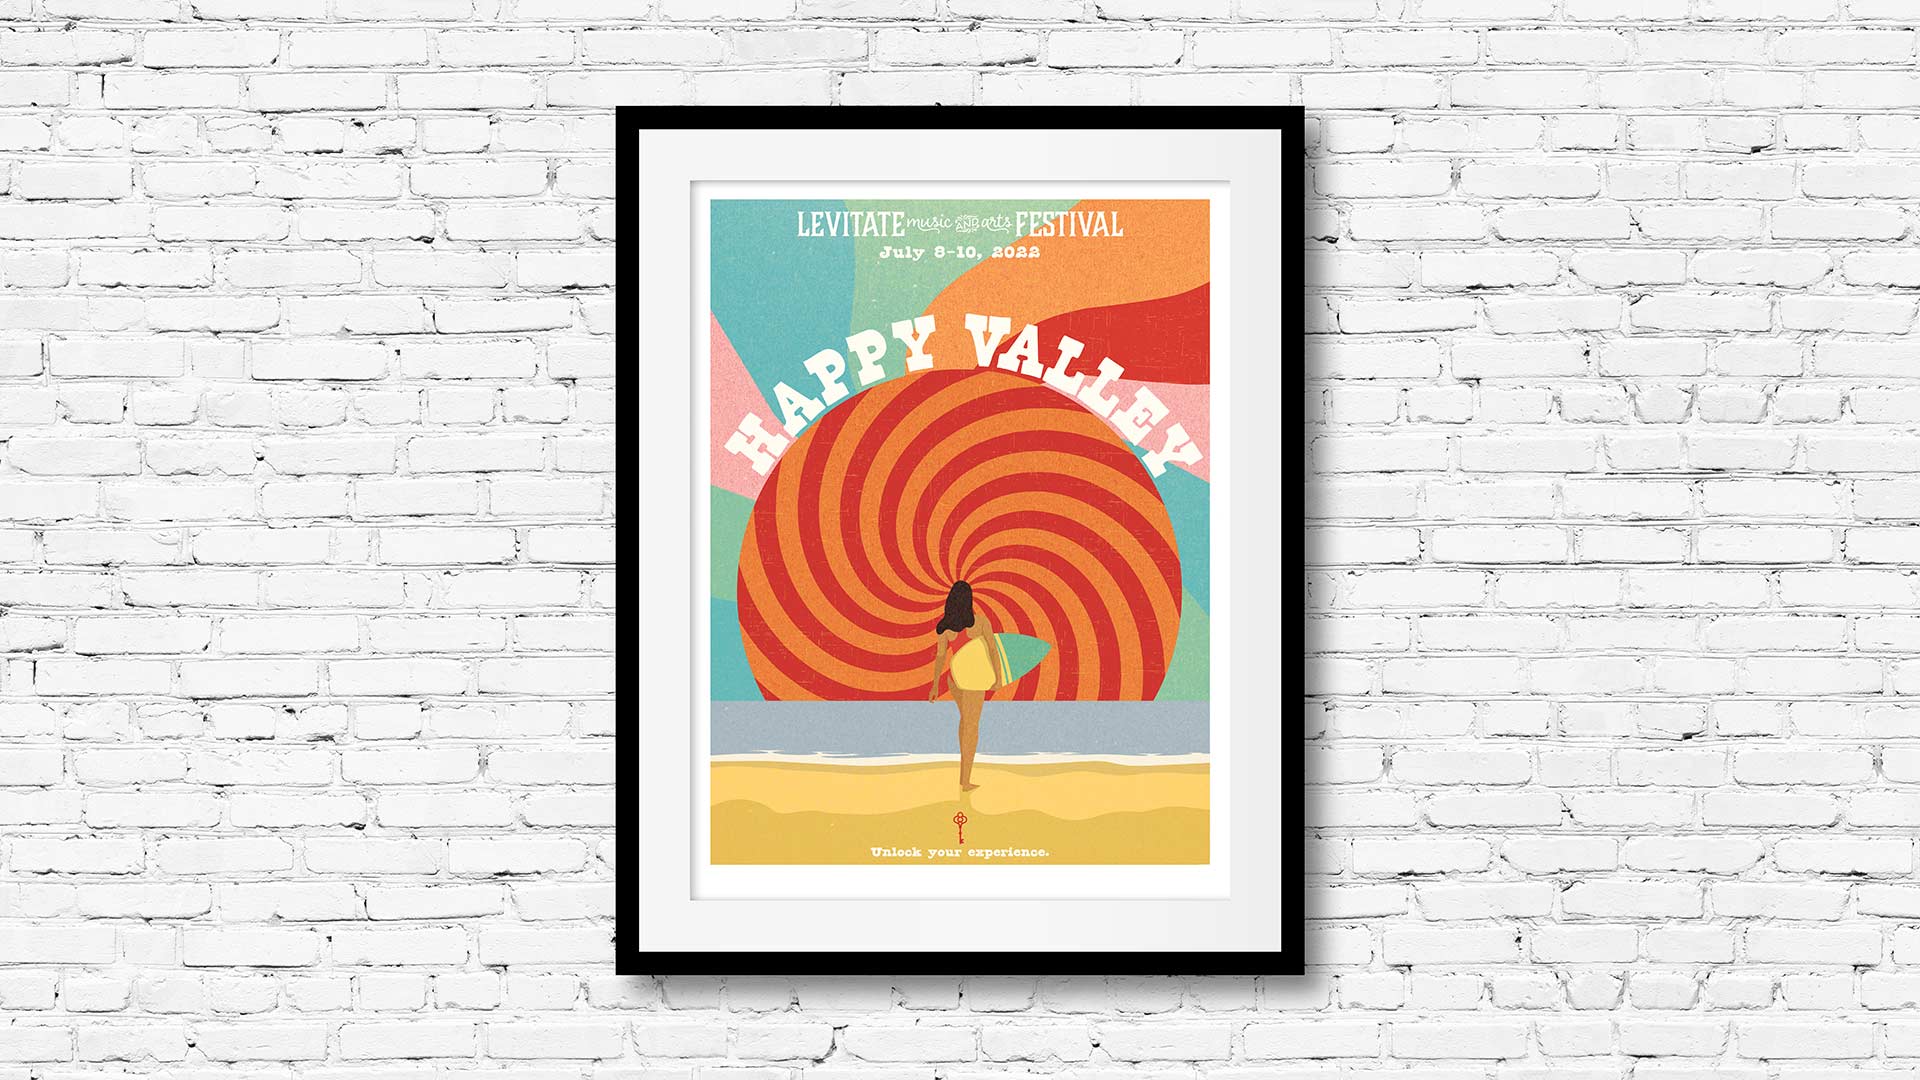 Surfer lady poster for Happy Valley